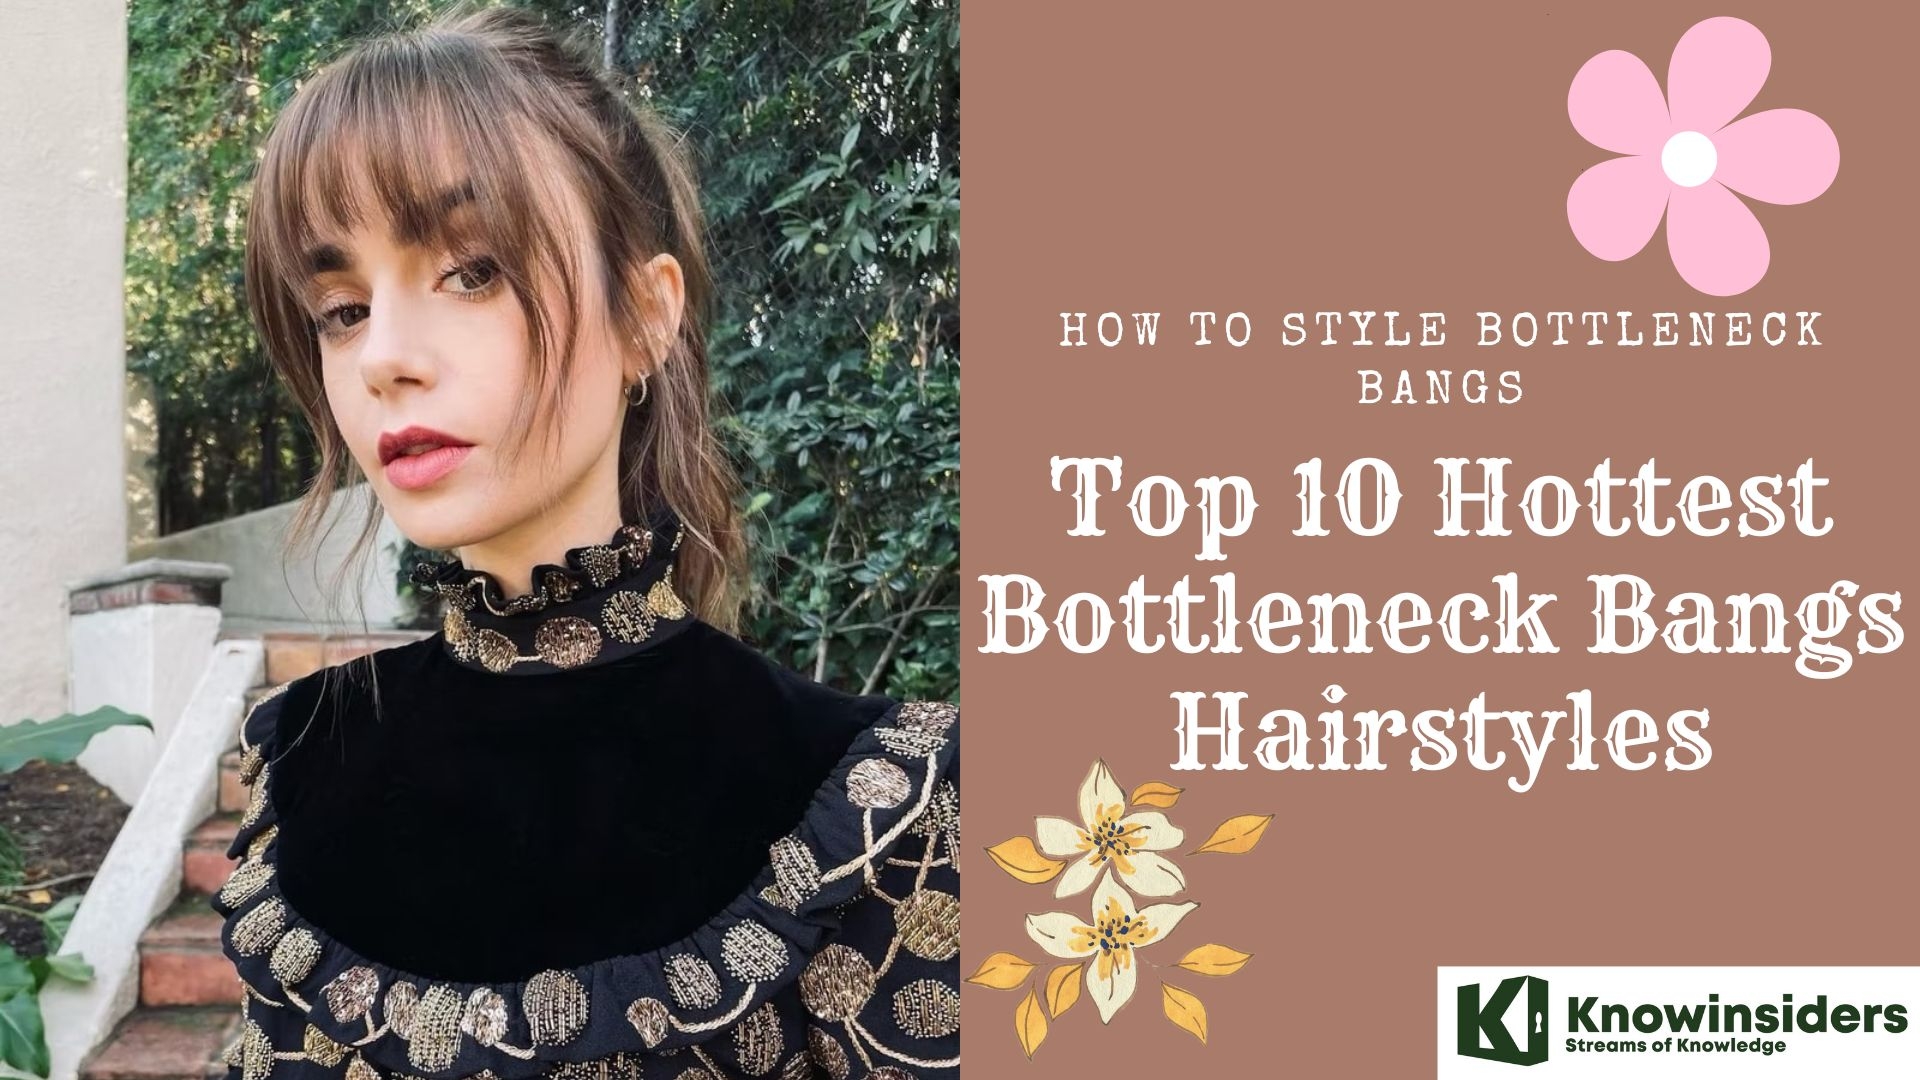 How To Style the Bottleneck Bangs Haircut and Top 10 Best Hairstyles